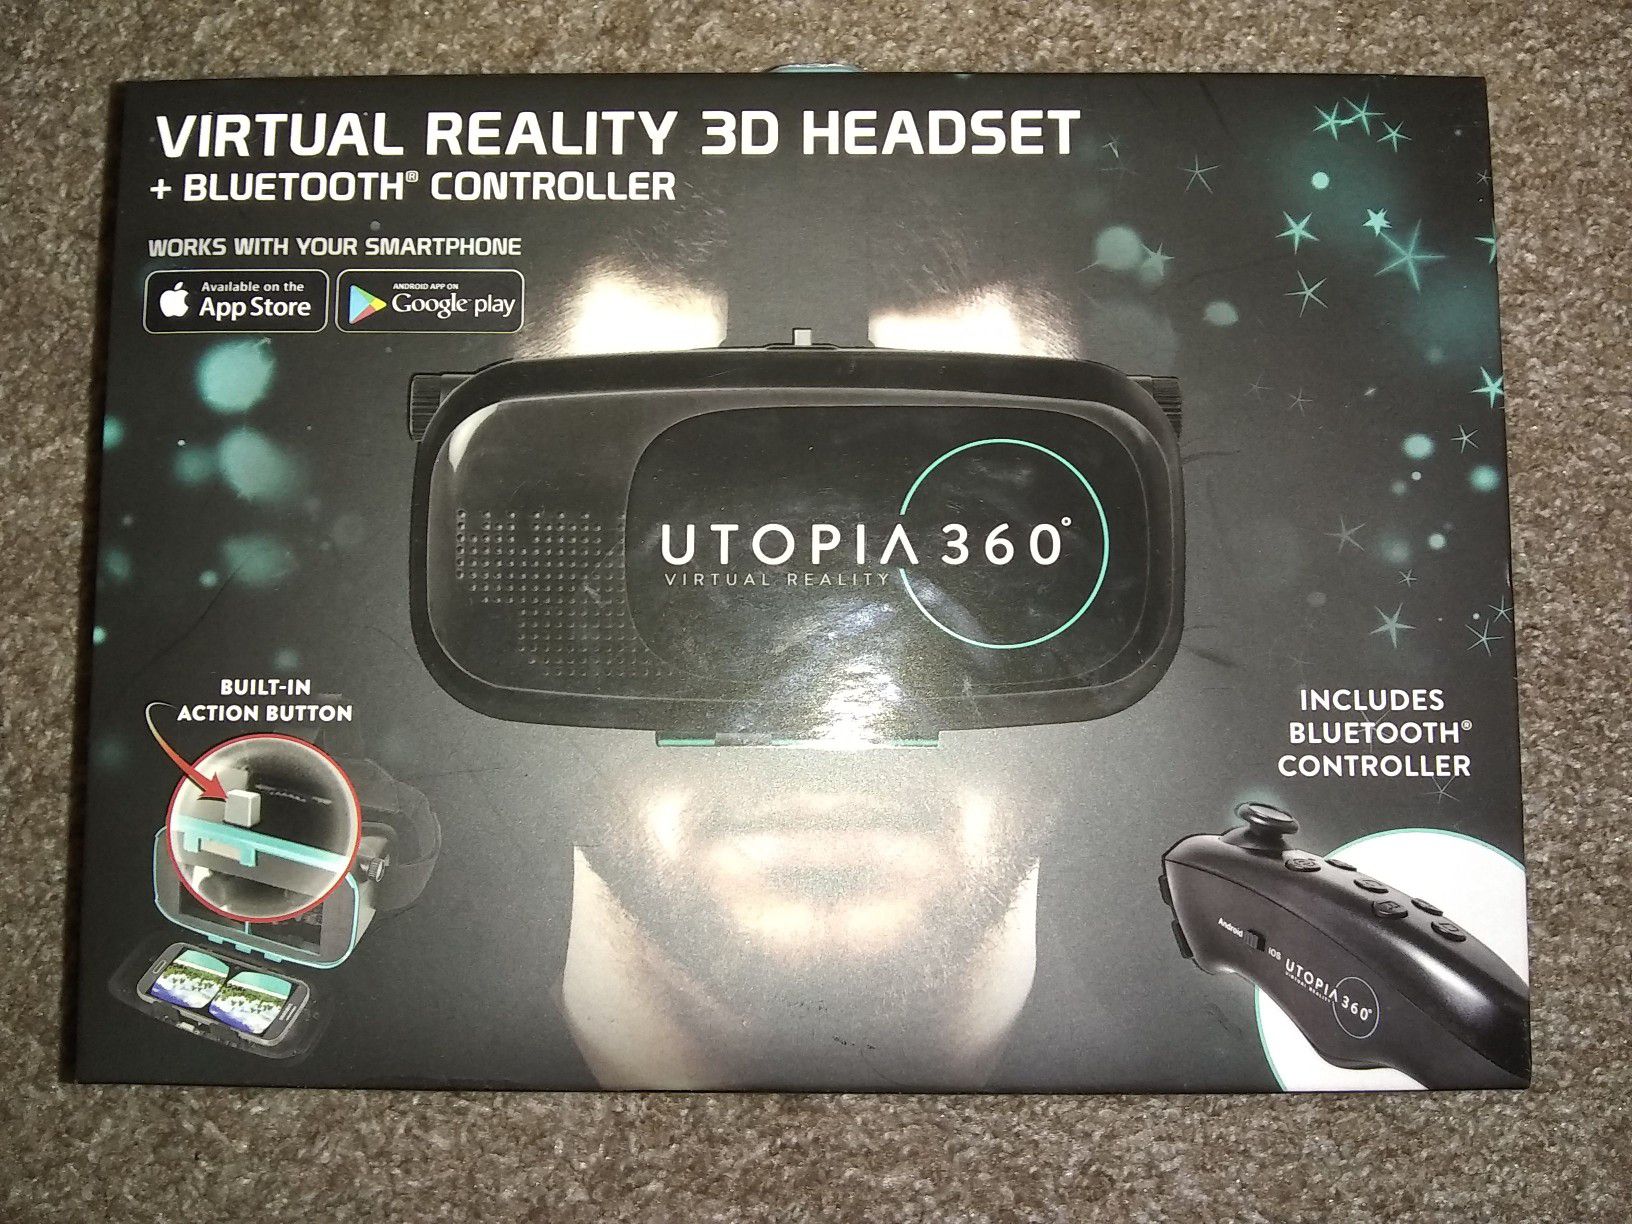 Virtual reality 3D headset with Bluetooth controller